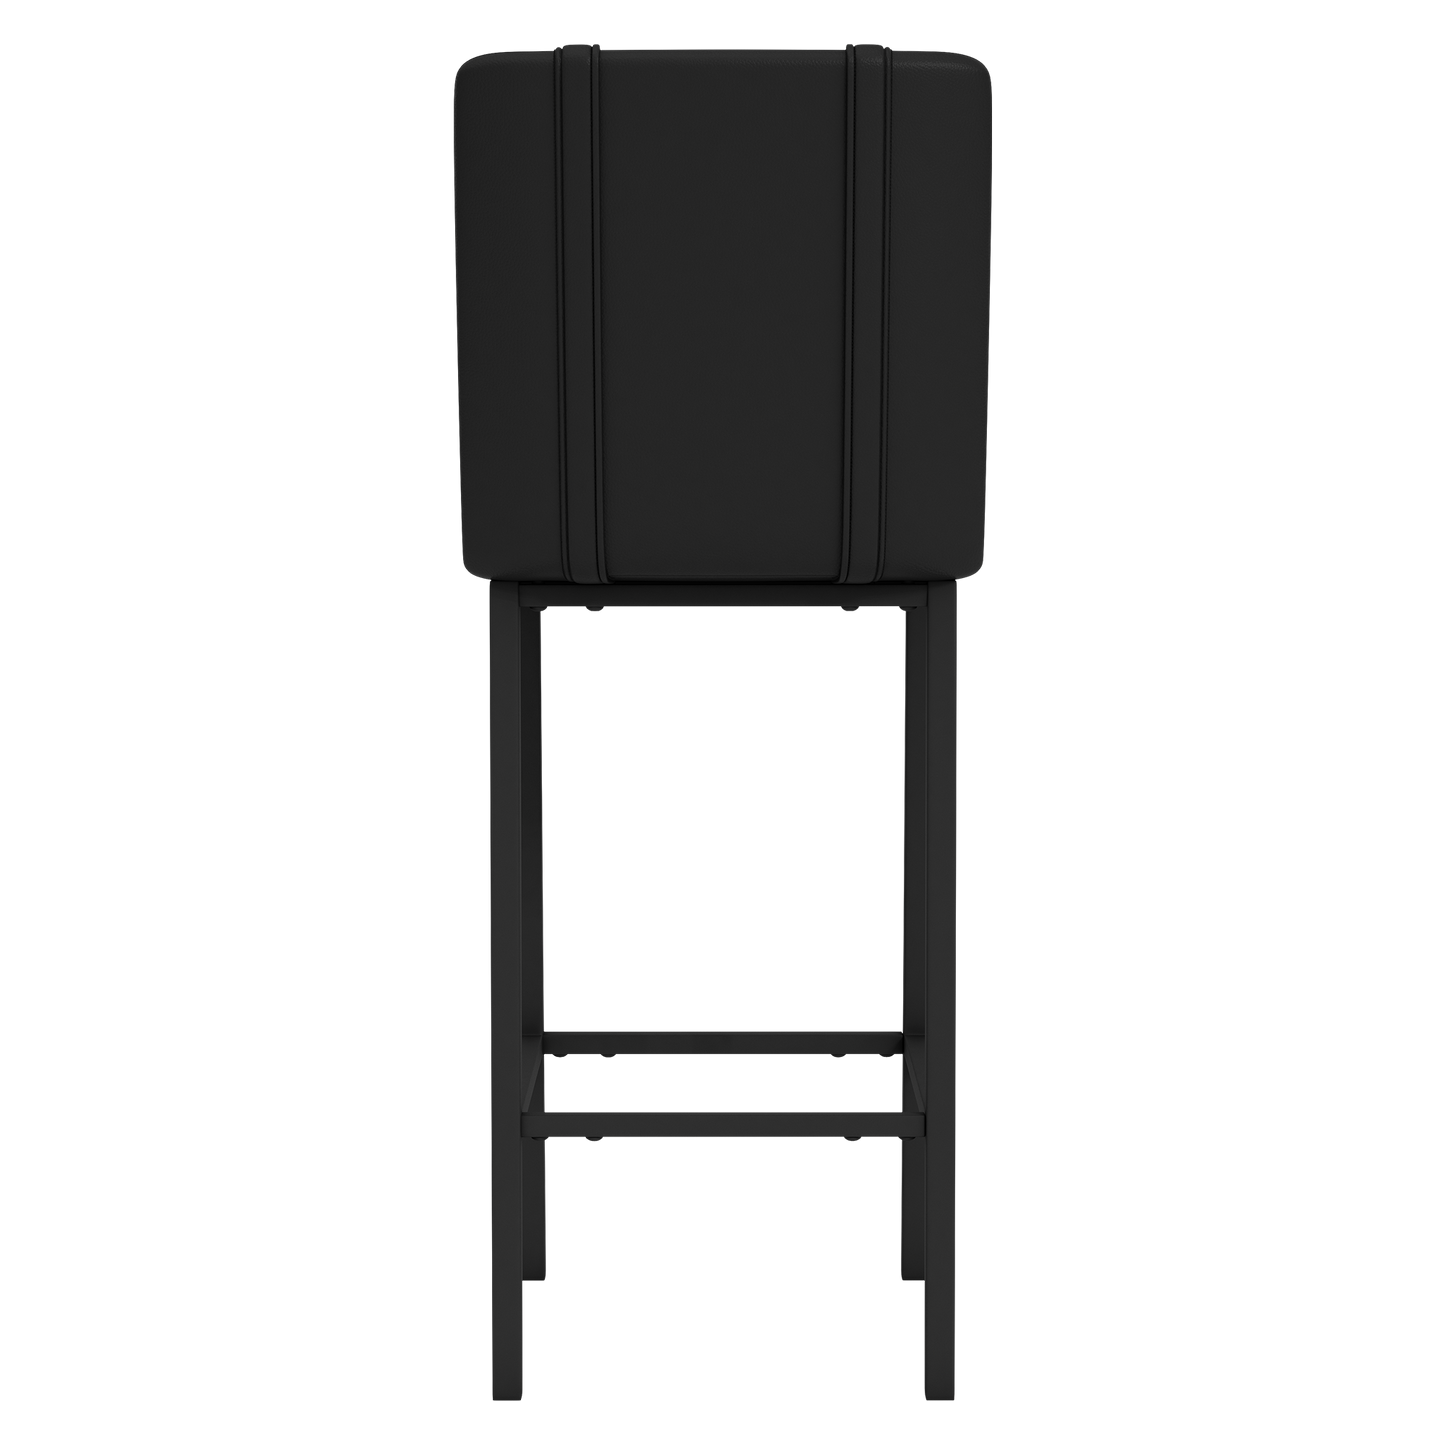 Bar Stool 500 with Chevy Racing Logo Set of 2